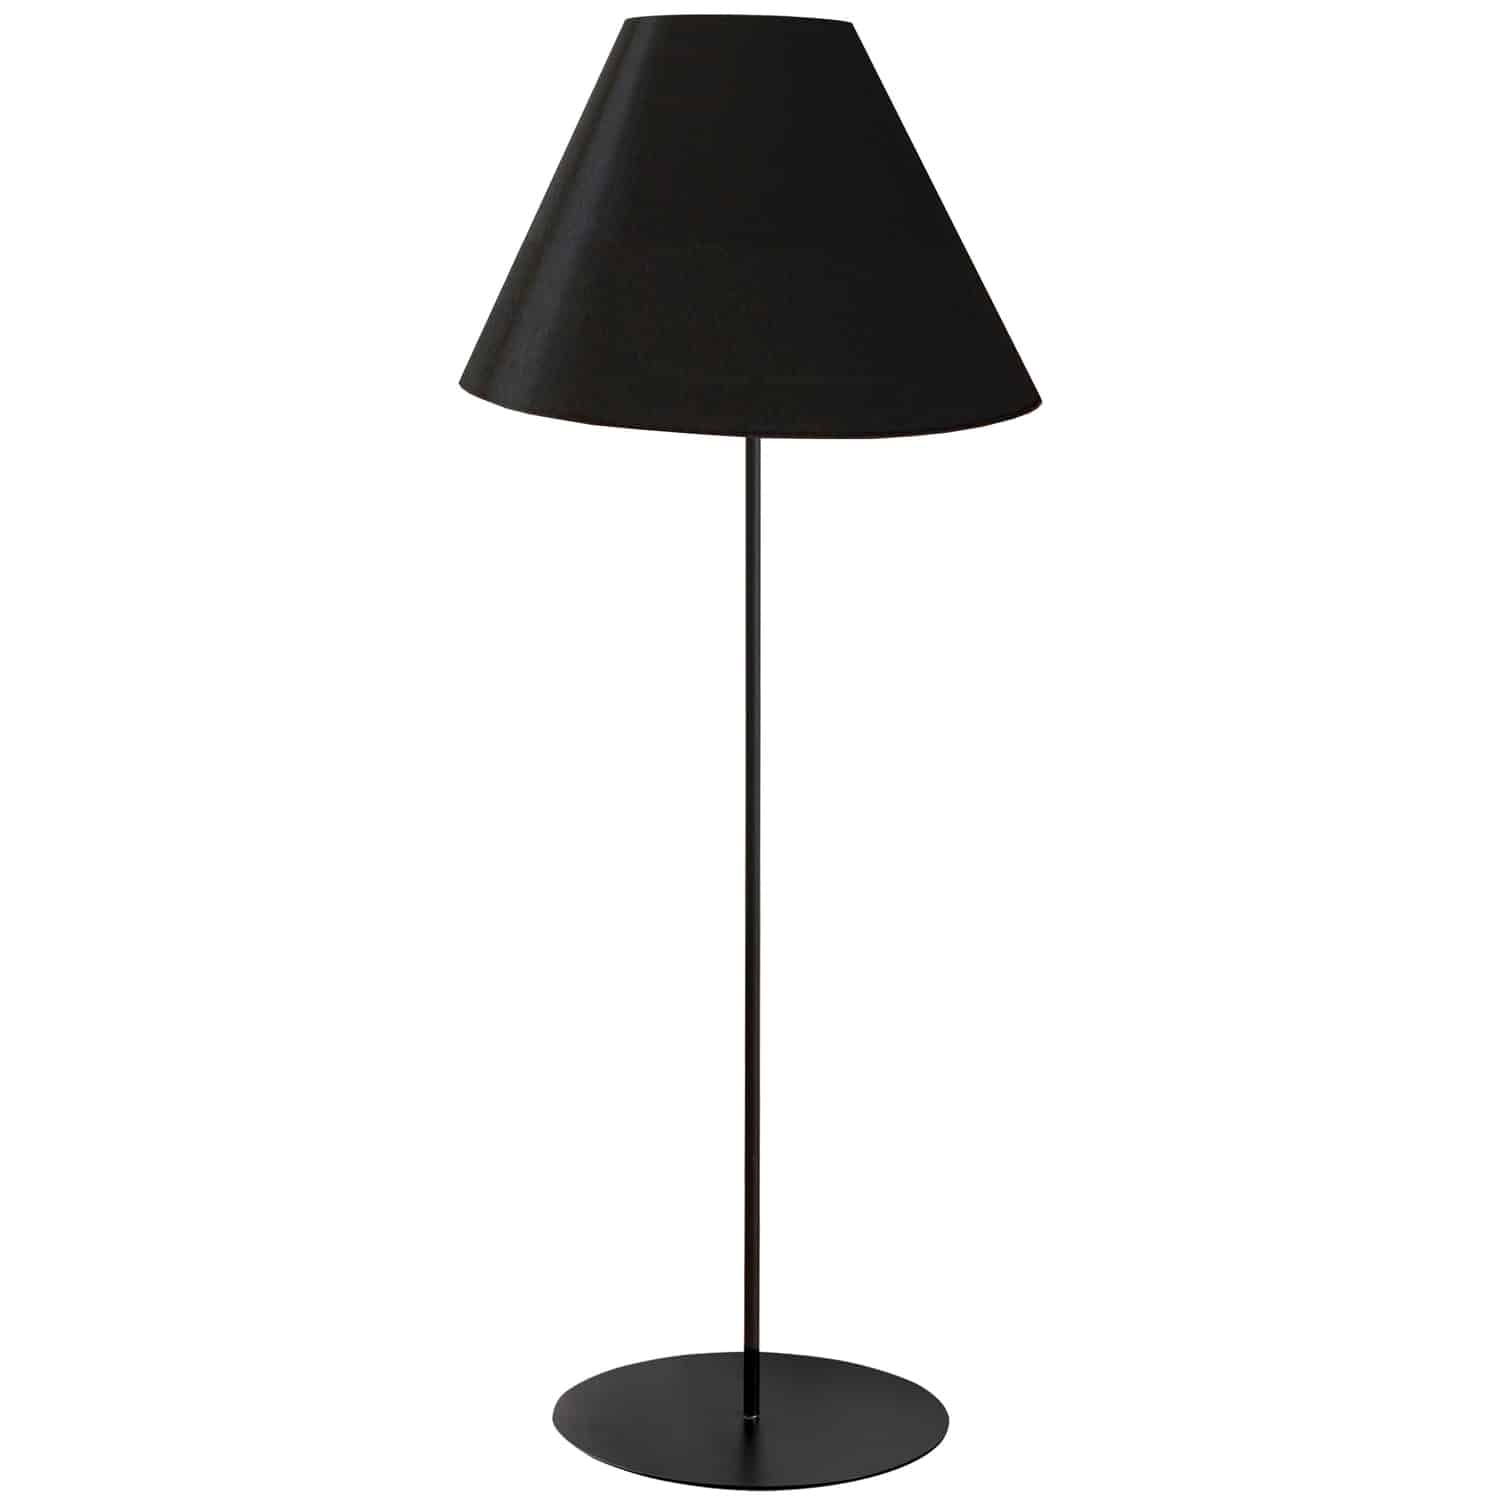 The Maine family of lighting is characterized by a simple silhouette and geometric appeal. Available in floor or table configurations, the look is stylishly simple, and based on contrasting proportions. A round metal base holds a slim rod and frame for a fabric shade. The hardback shade is available in a range of shapes and colors from a simple to tapered drum or cone shade. The look is classically contemporary, with clean lines that will enhance the furnishings in your bedroom, living room or office space.